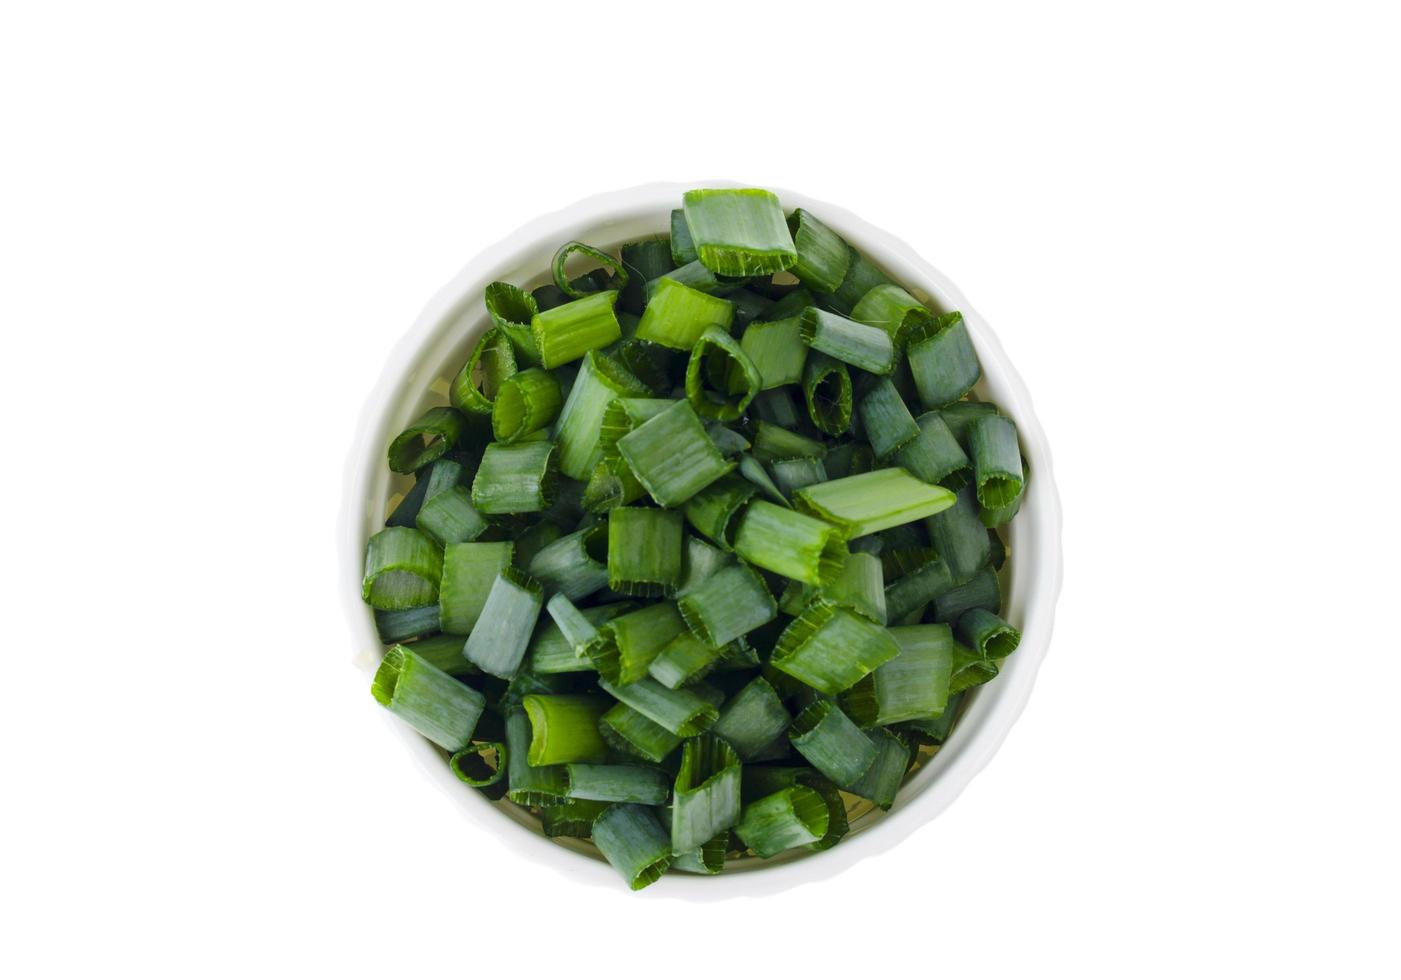 Bowl with slices of chopped green onions for preparing healthy dishes. photo